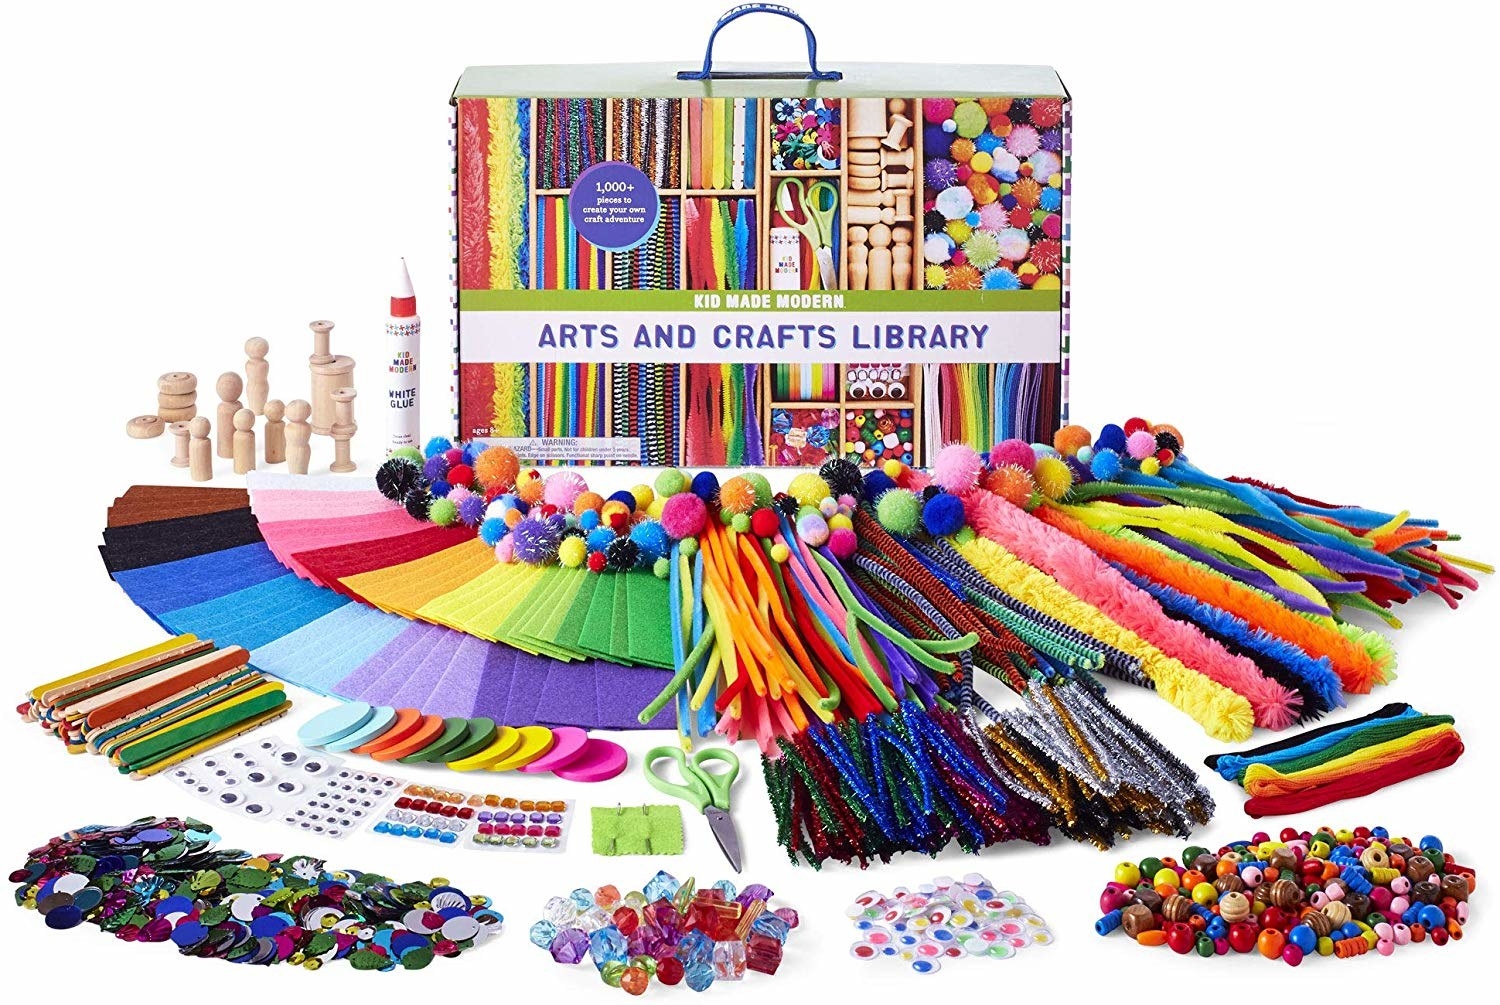 the contents of the arts and crafts library laid out in fronts of its box